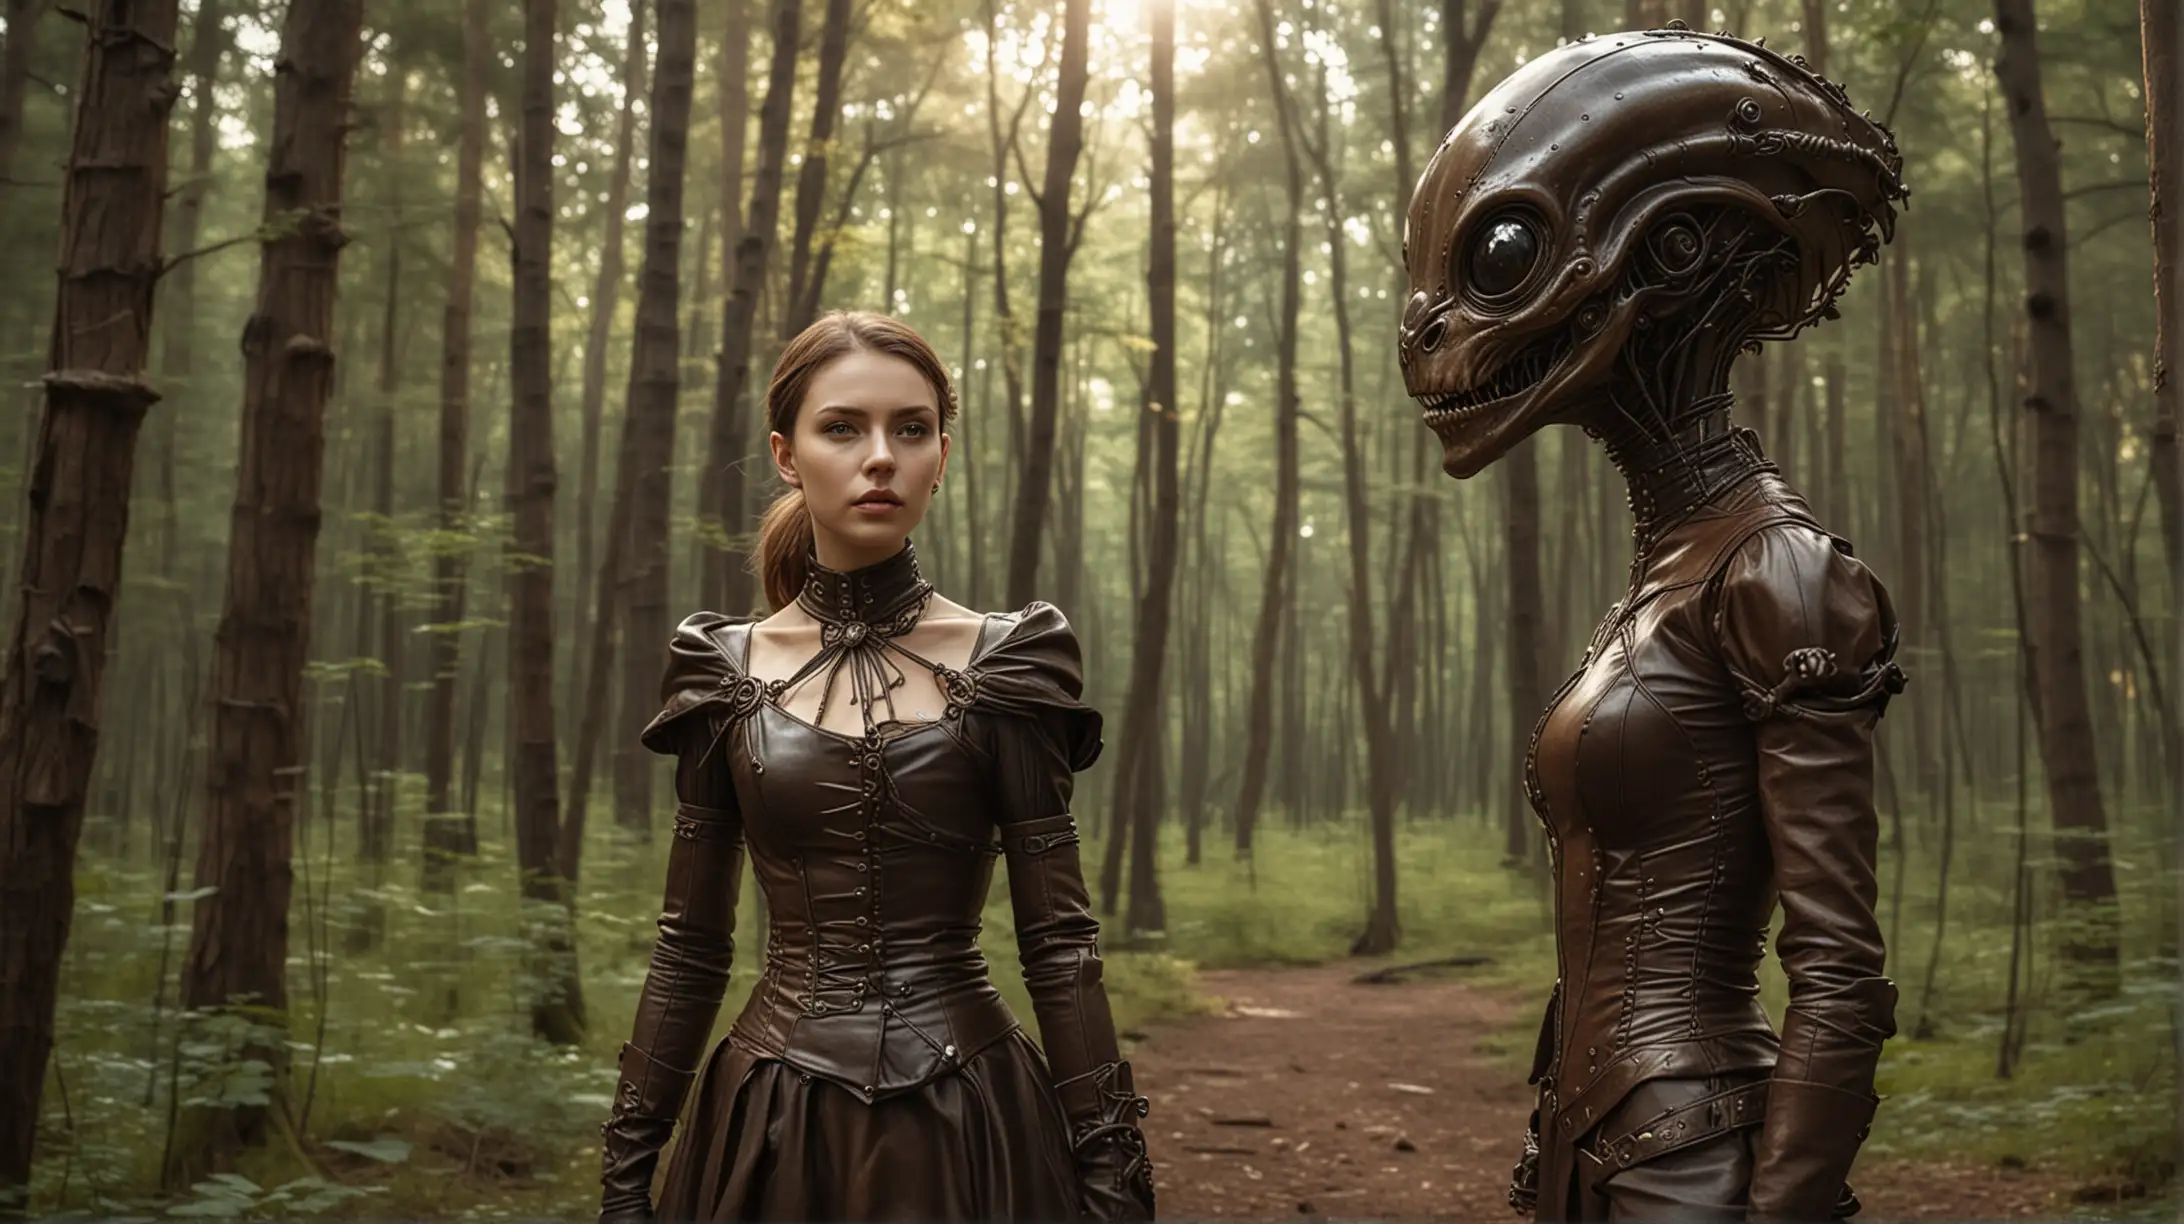 A young steampunk woman in an elegant leather dress meets a human-like alien in a forest, the woman is not afraid and is curious, sunny and hot